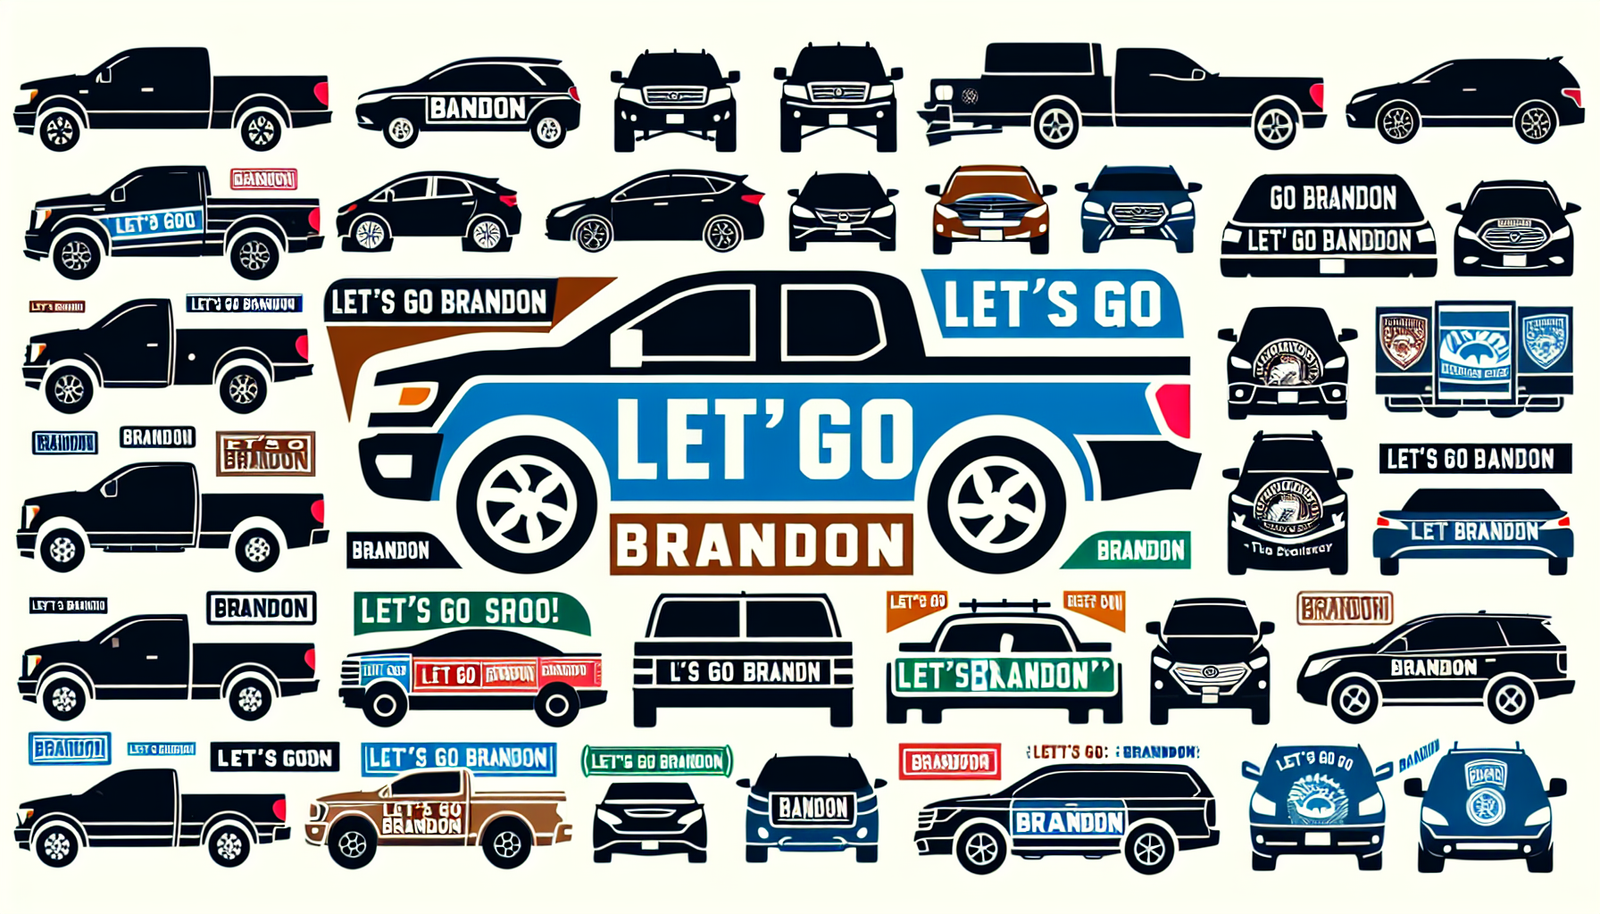 Visualize the trend of automotive decal stickers featuring the phrase 'Let's Go Brandon'. Show various vehicles of different makes and models displaying these decals, suggesting their popularity among